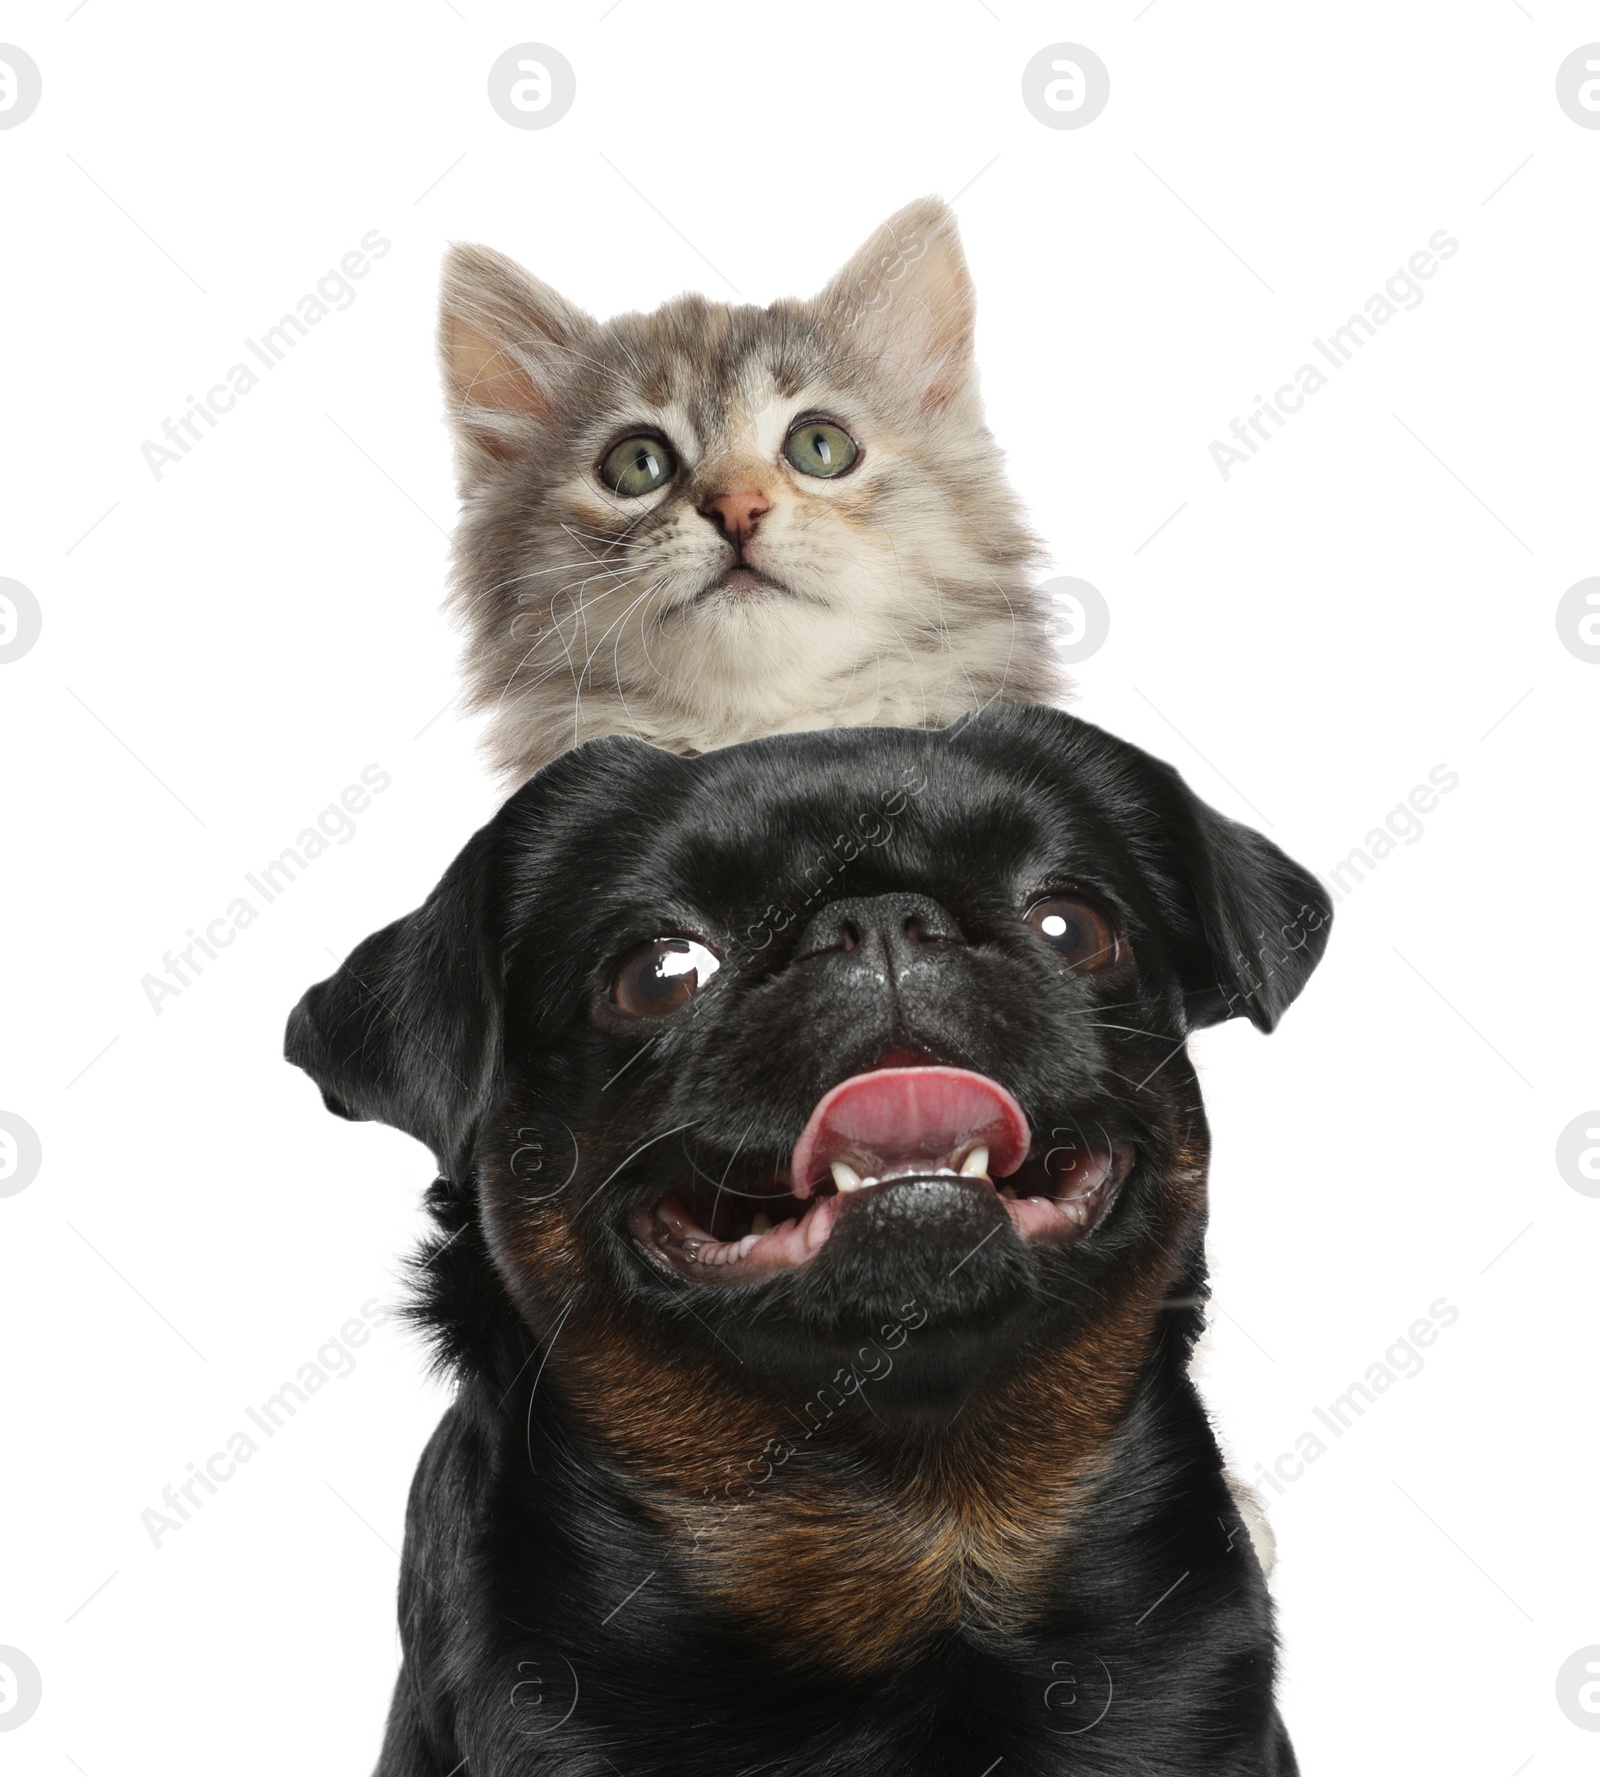 Image of Adorable cat and dog on white background. Cute friends